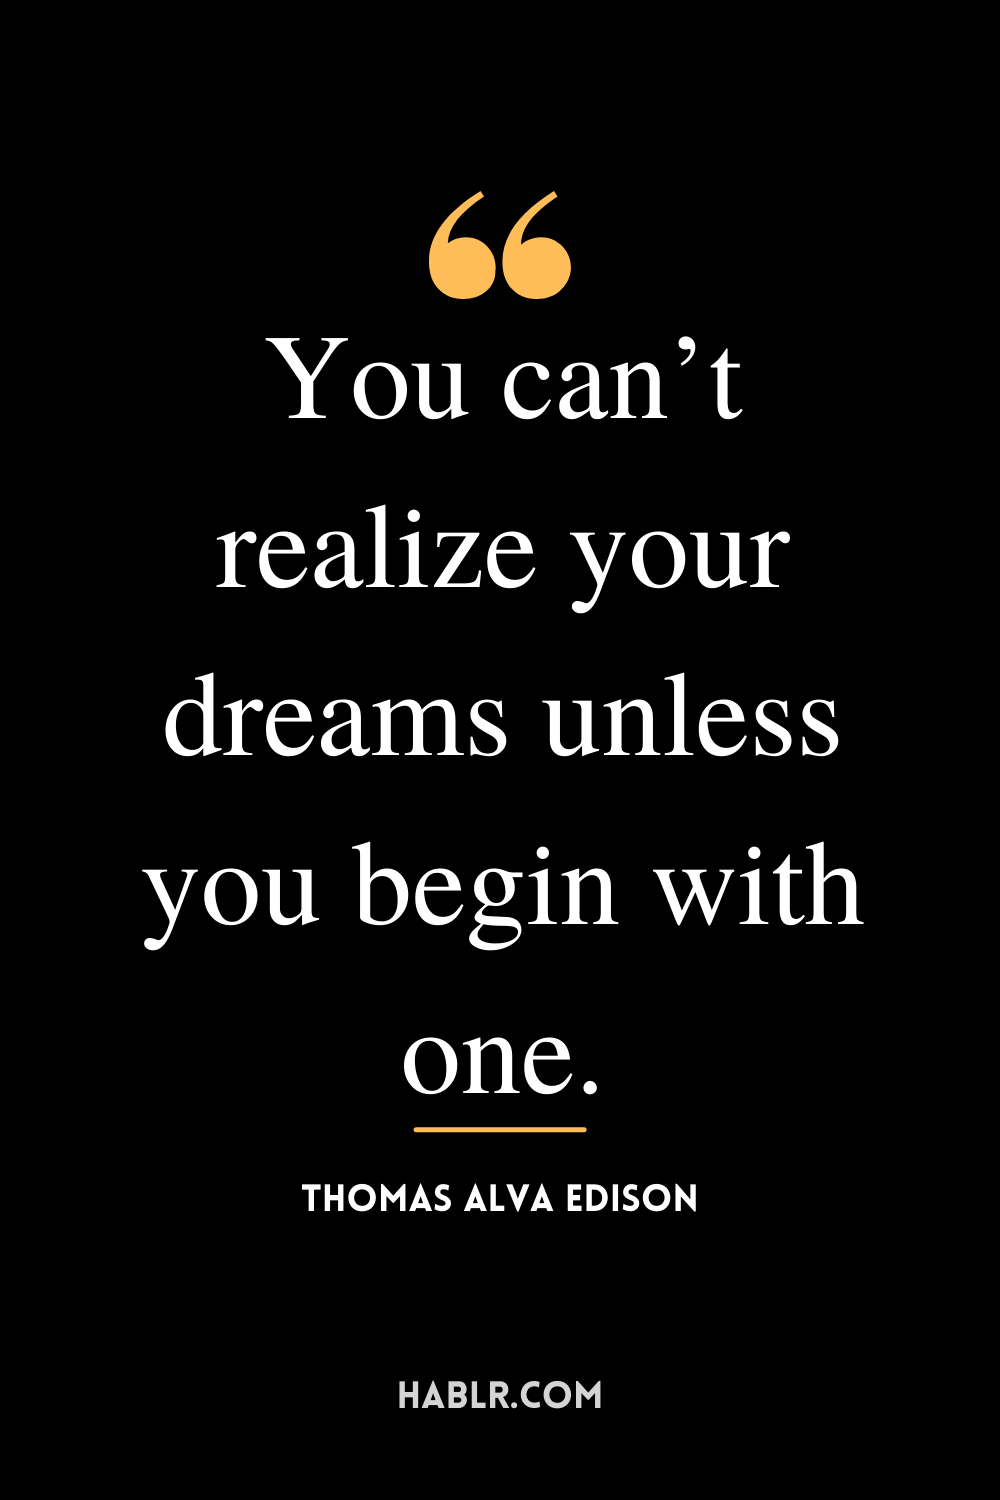 “You can’t realize your dreams unless you begin with one.” -Thomas Alva Edison